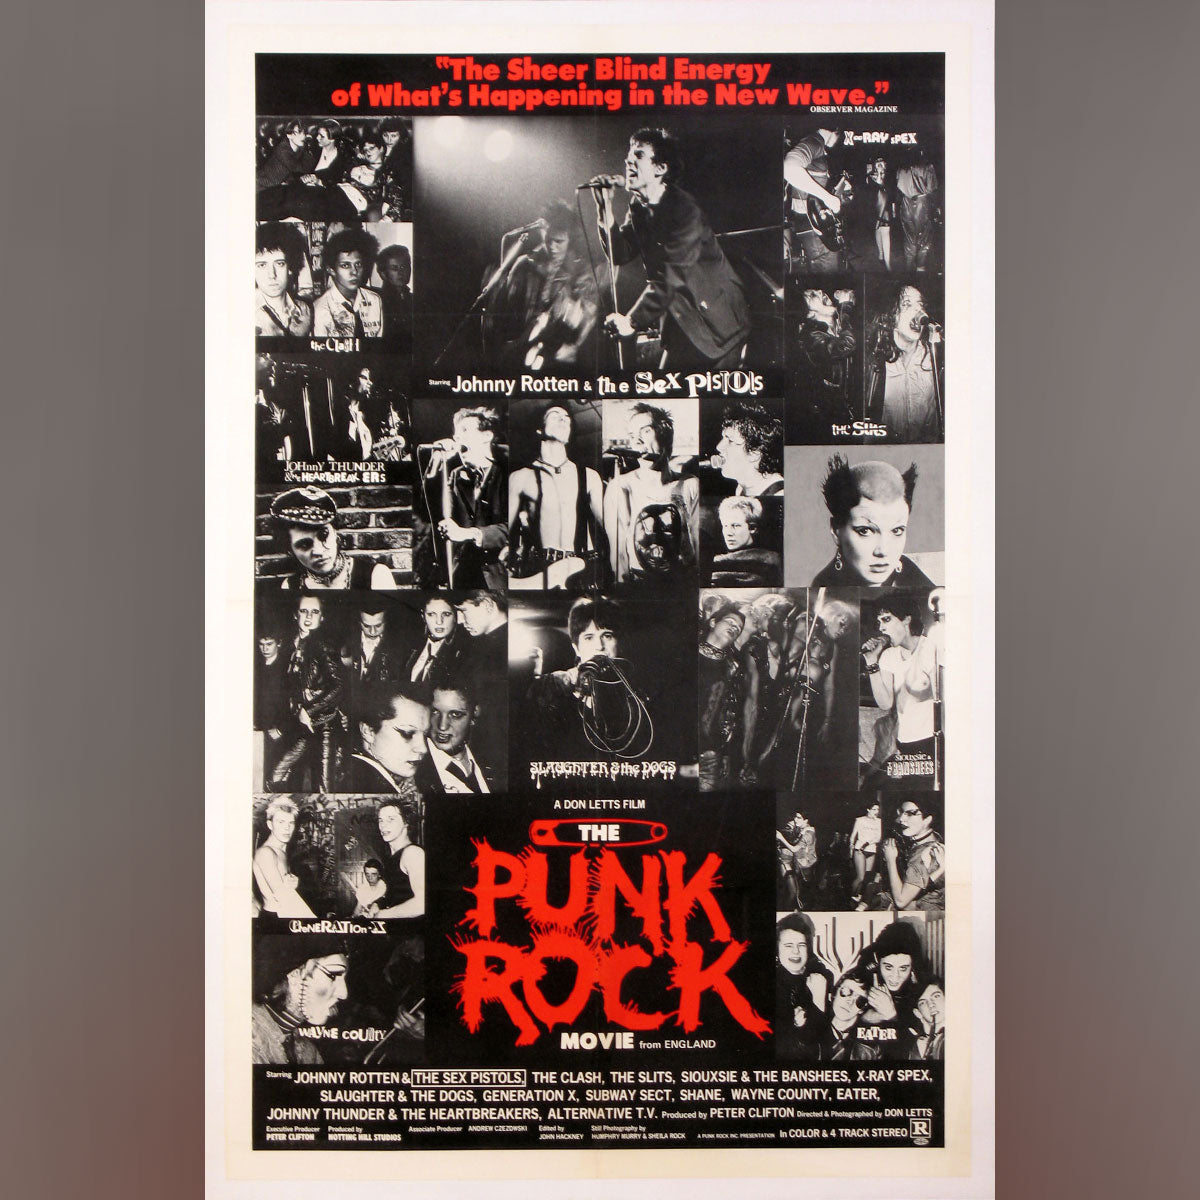 Punk Rock Movie From England, The (1978)